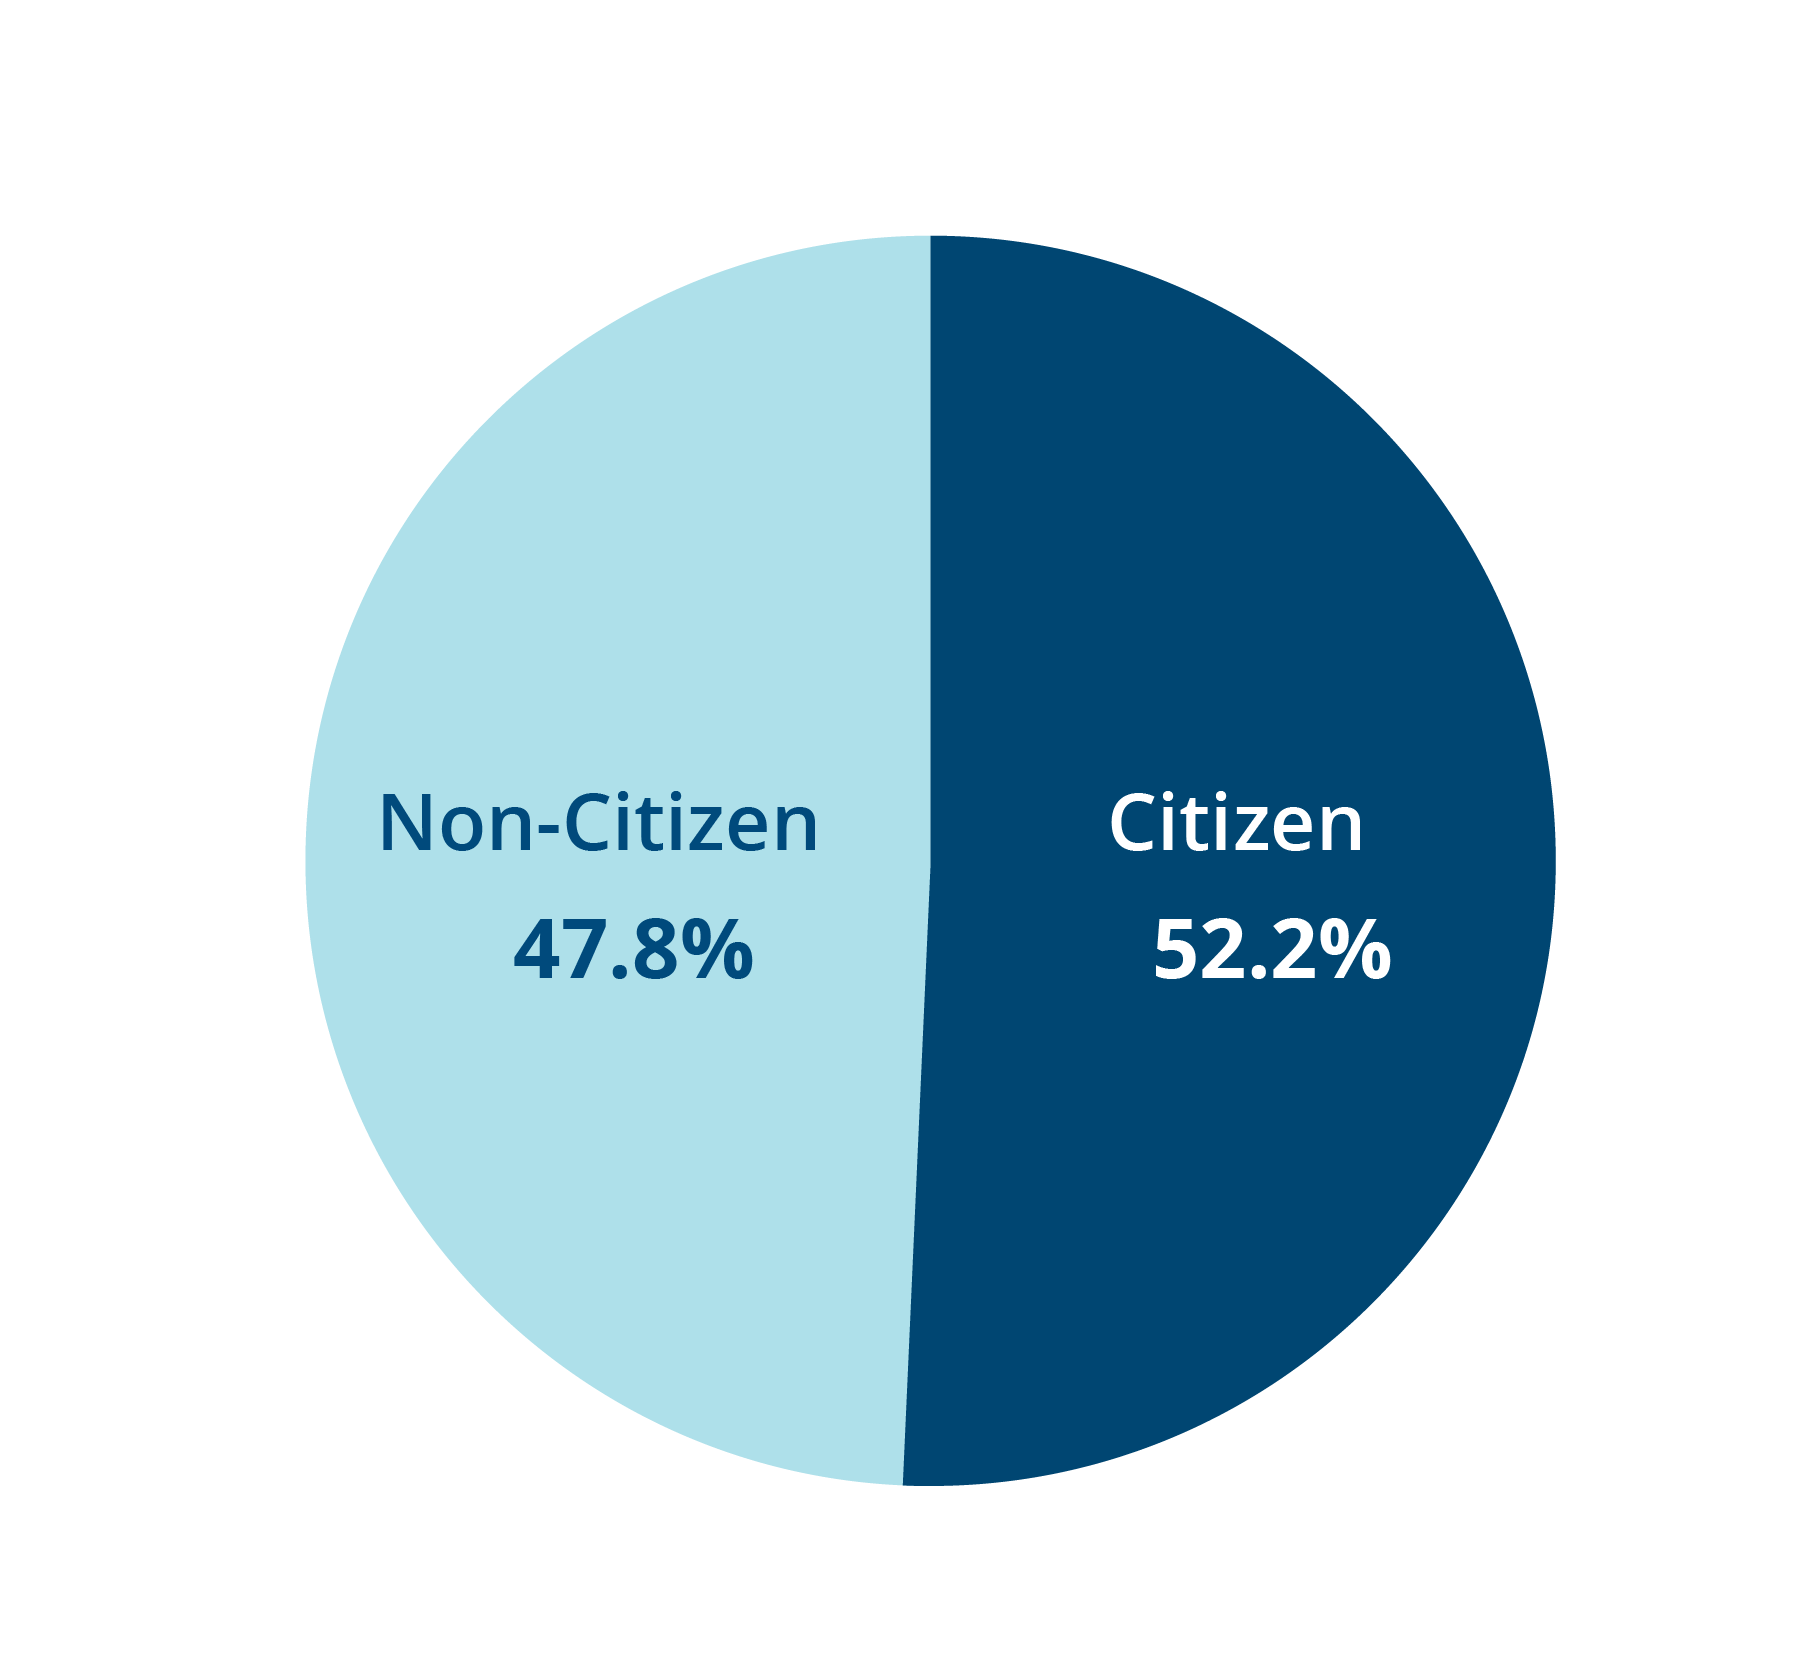 Pie chart showing that more than half (52.2%) of all immigrants have become United States citizens.